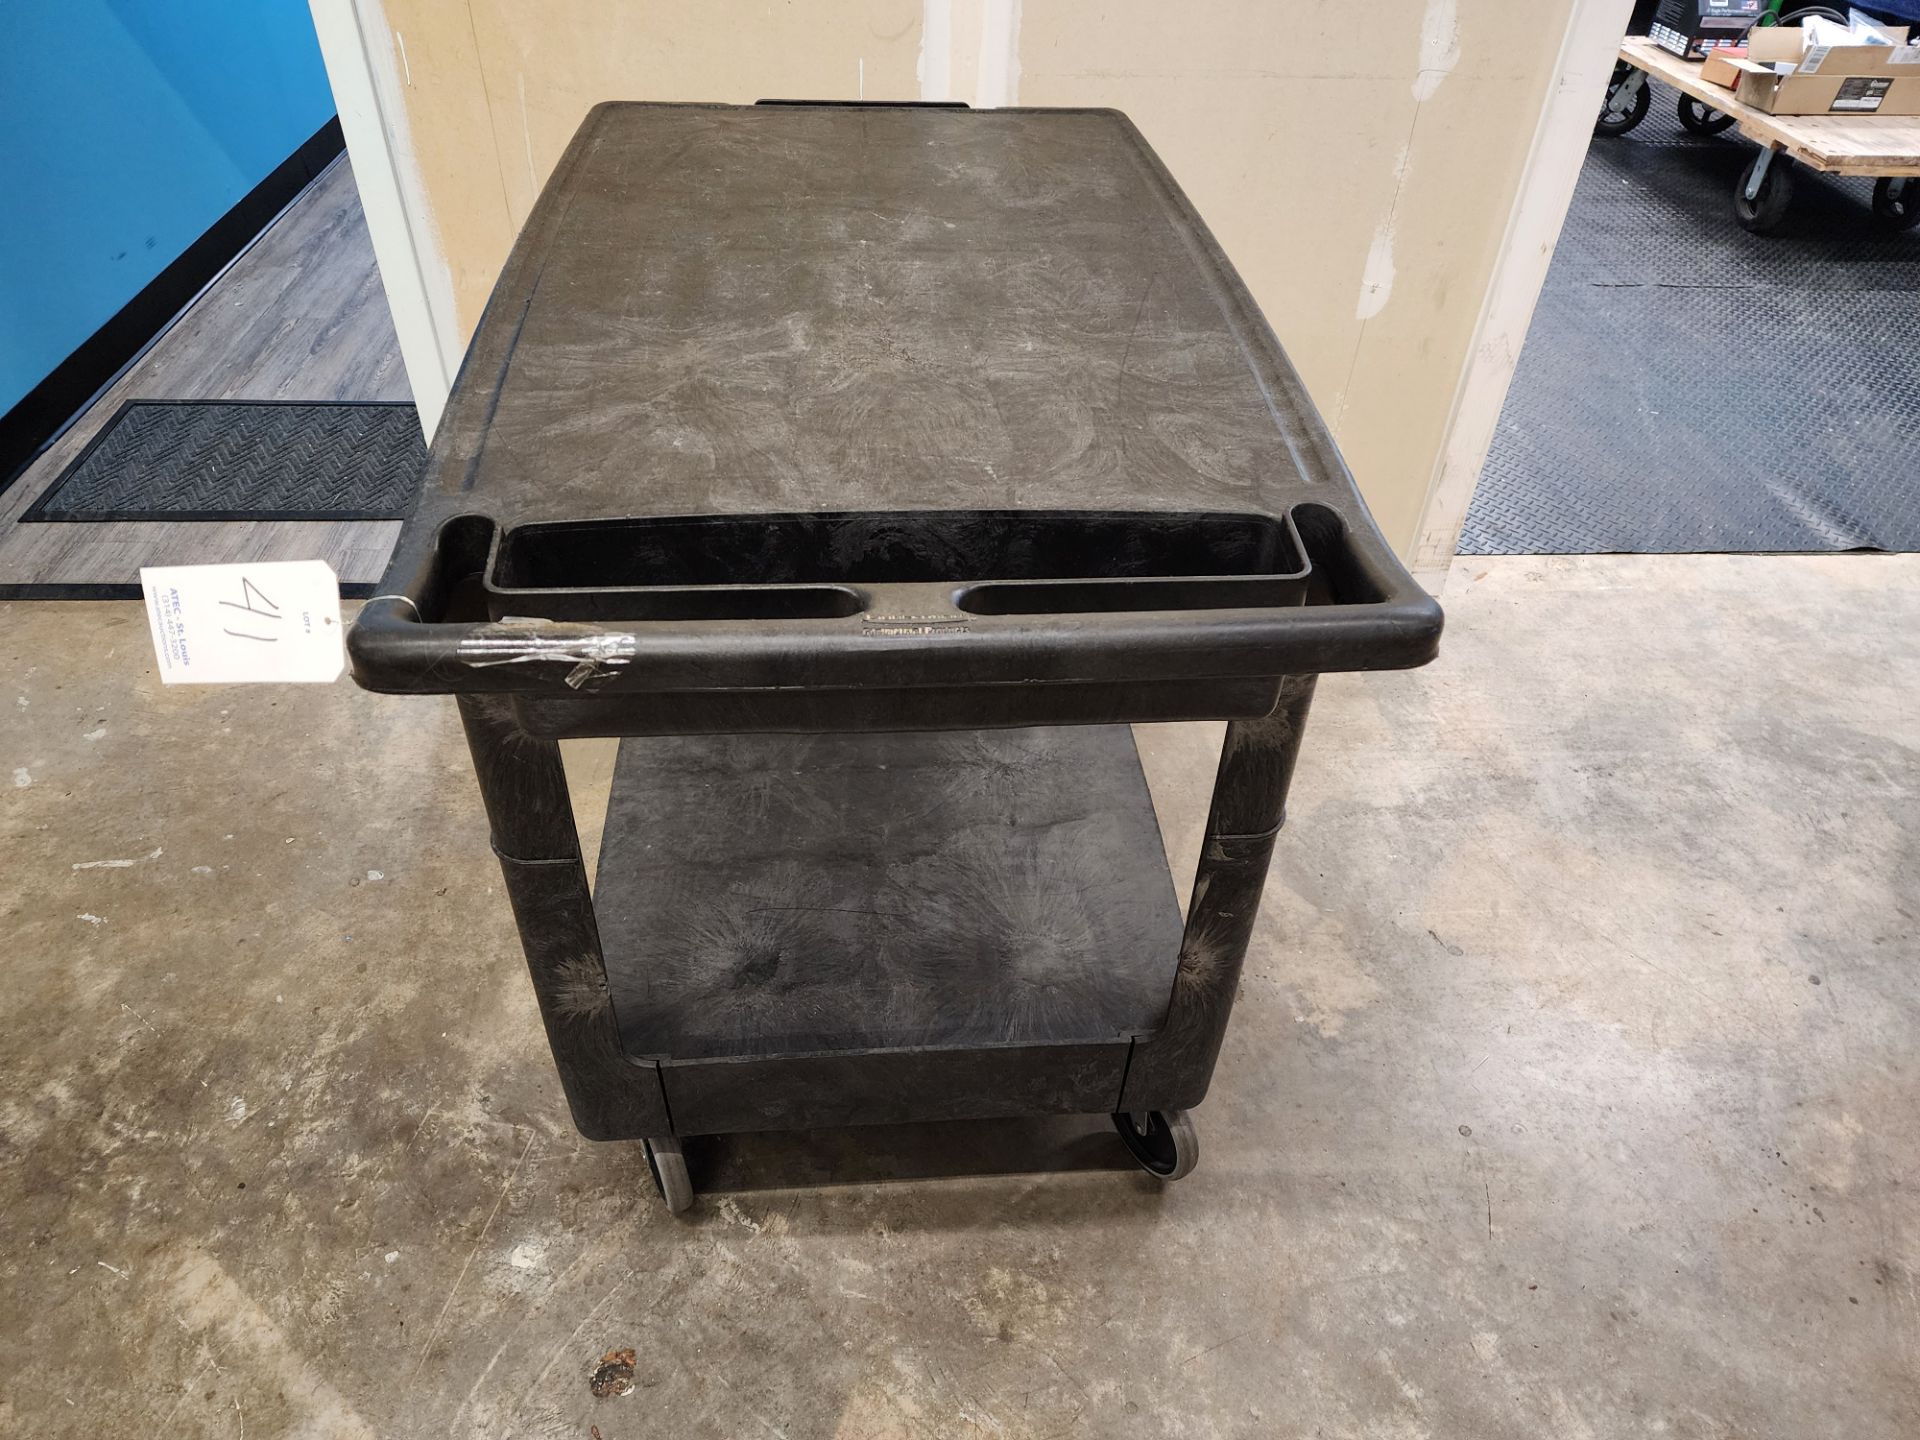 Black Rubbermaid Utility Cart, 2-Tier, 25"x36" - Image 2 of 4